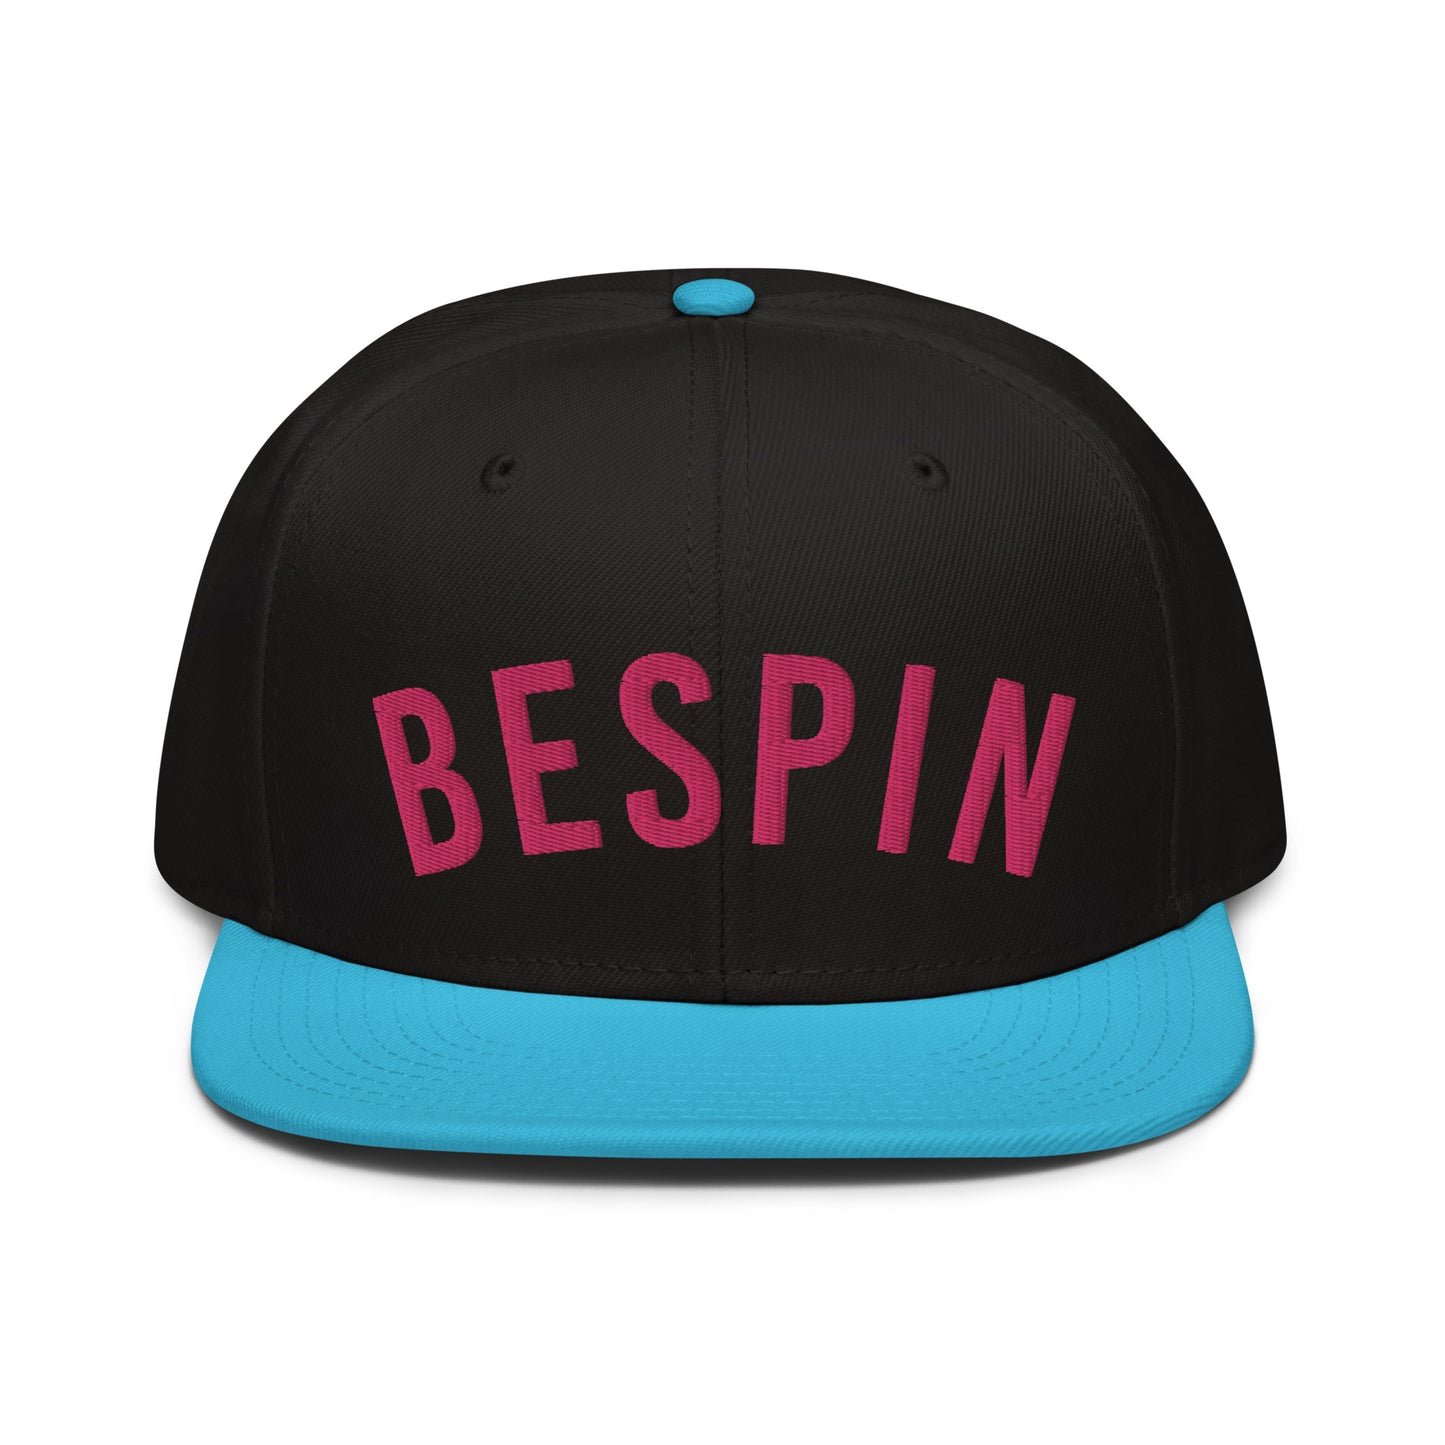 Bespin Home Team snapback hat